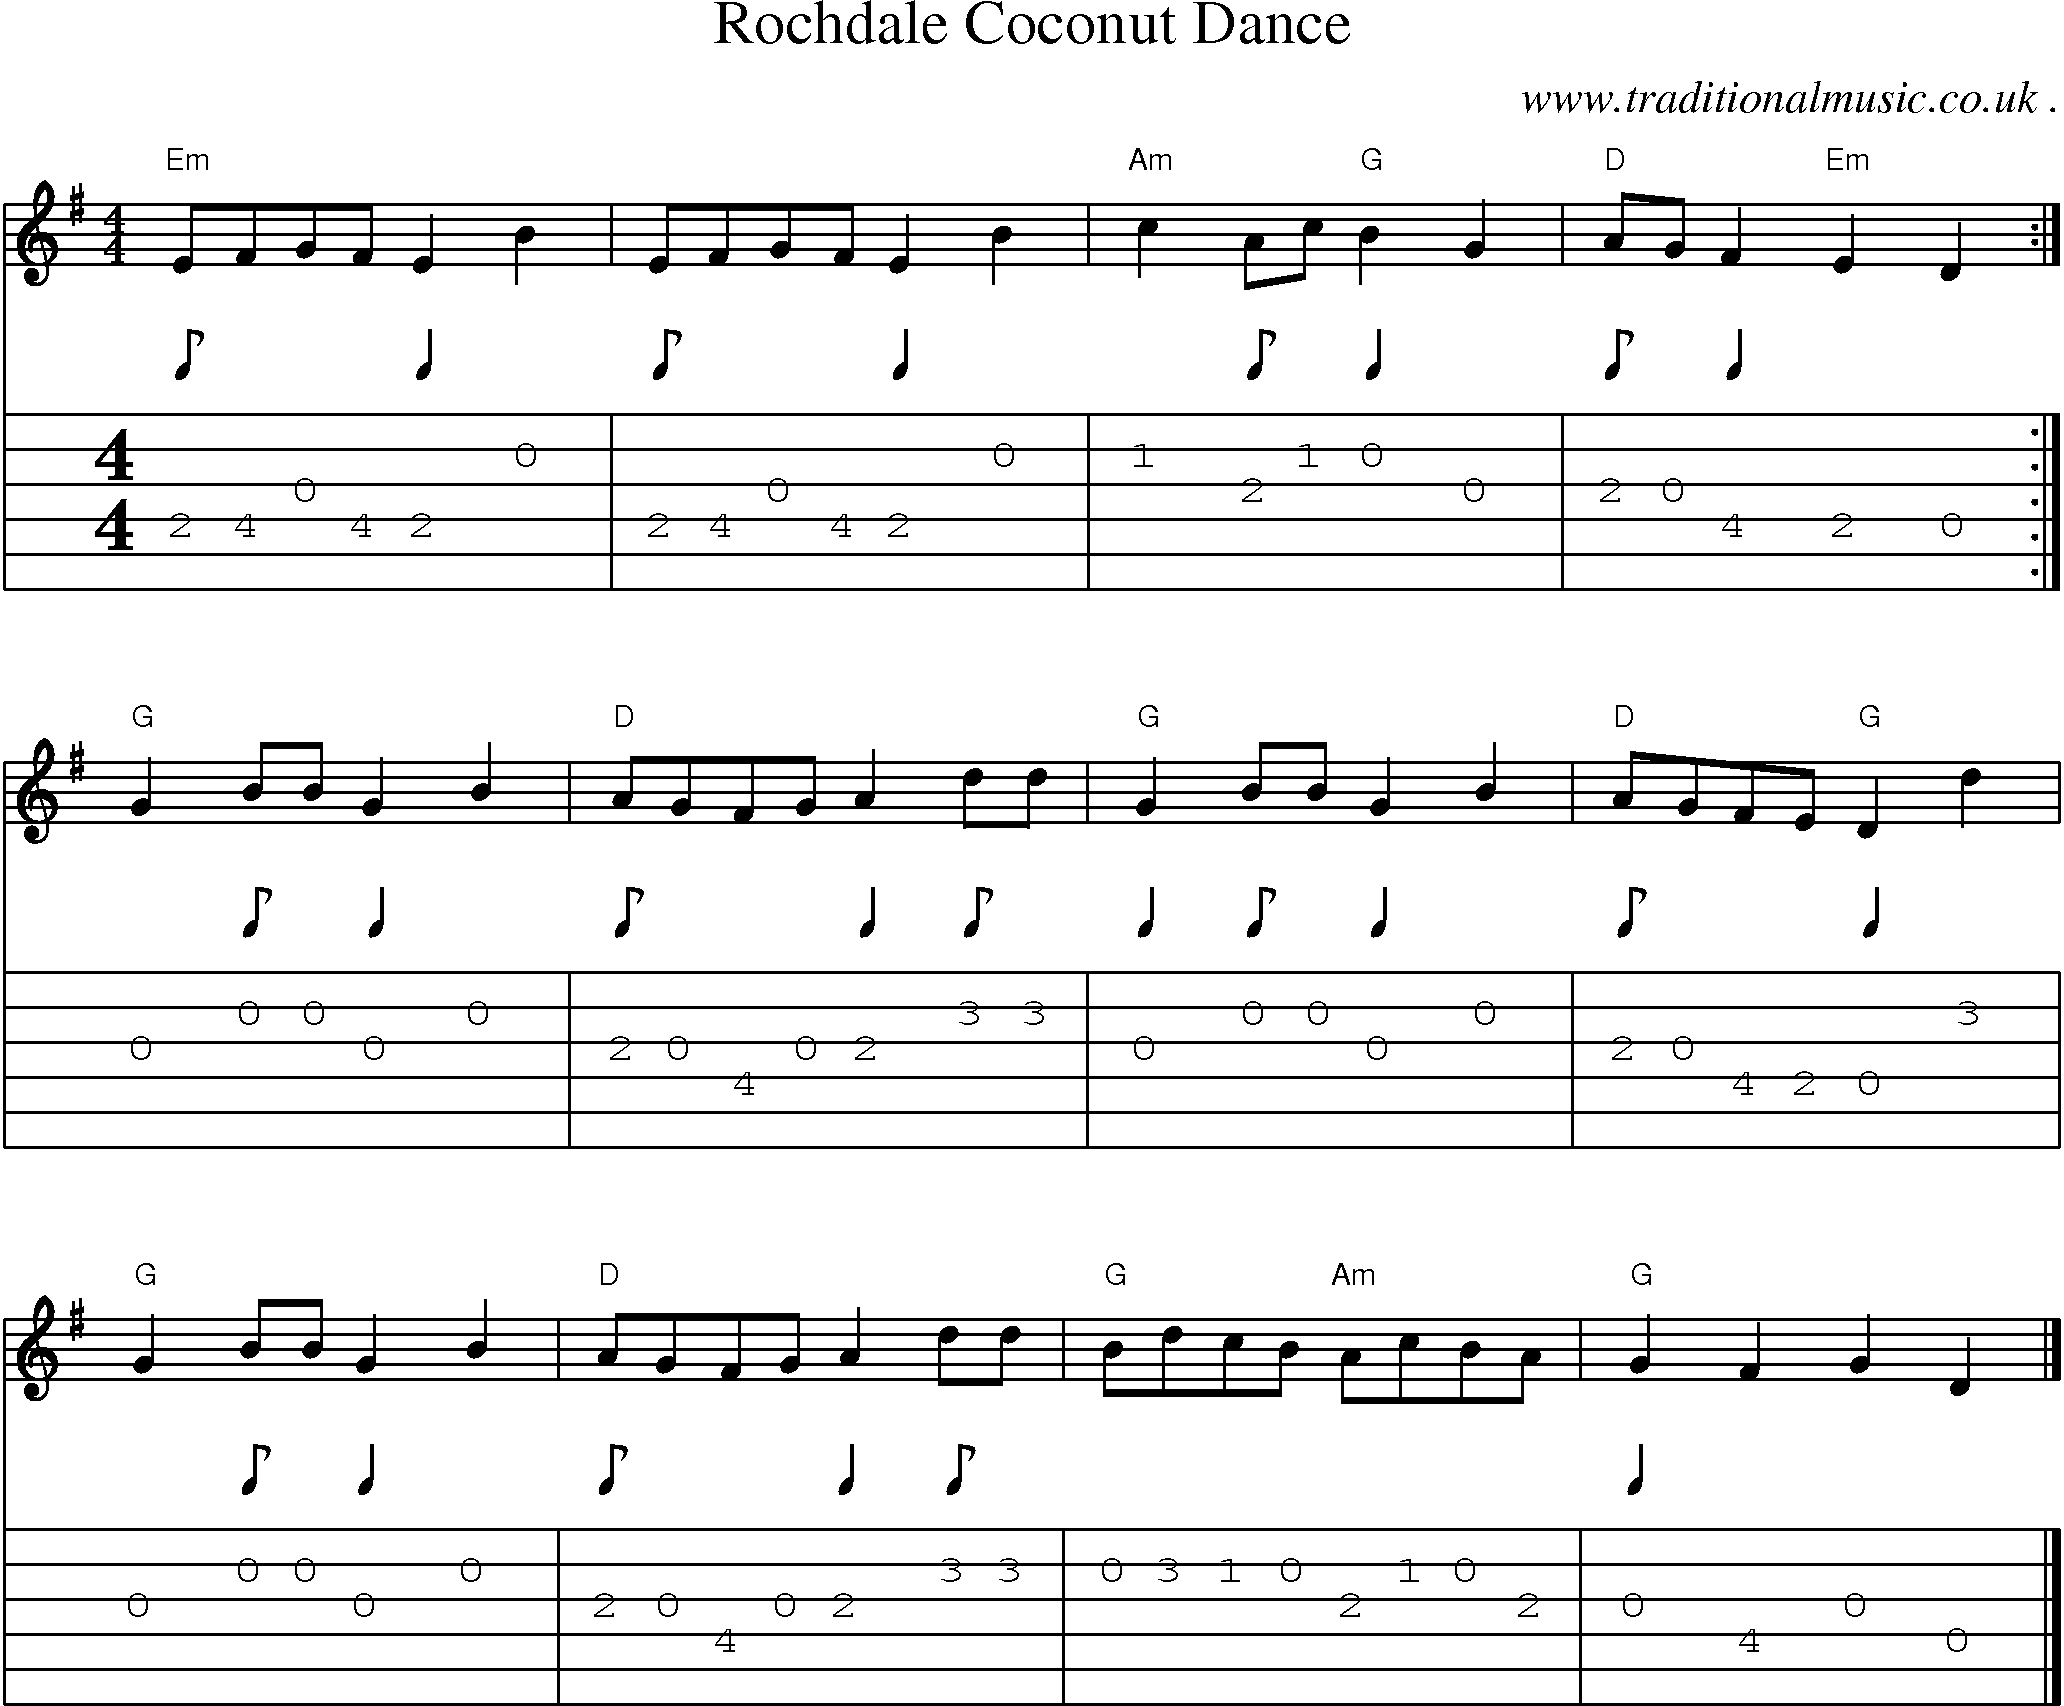 Music Score and Guitar Tabs for Rochdale Coconut Dance